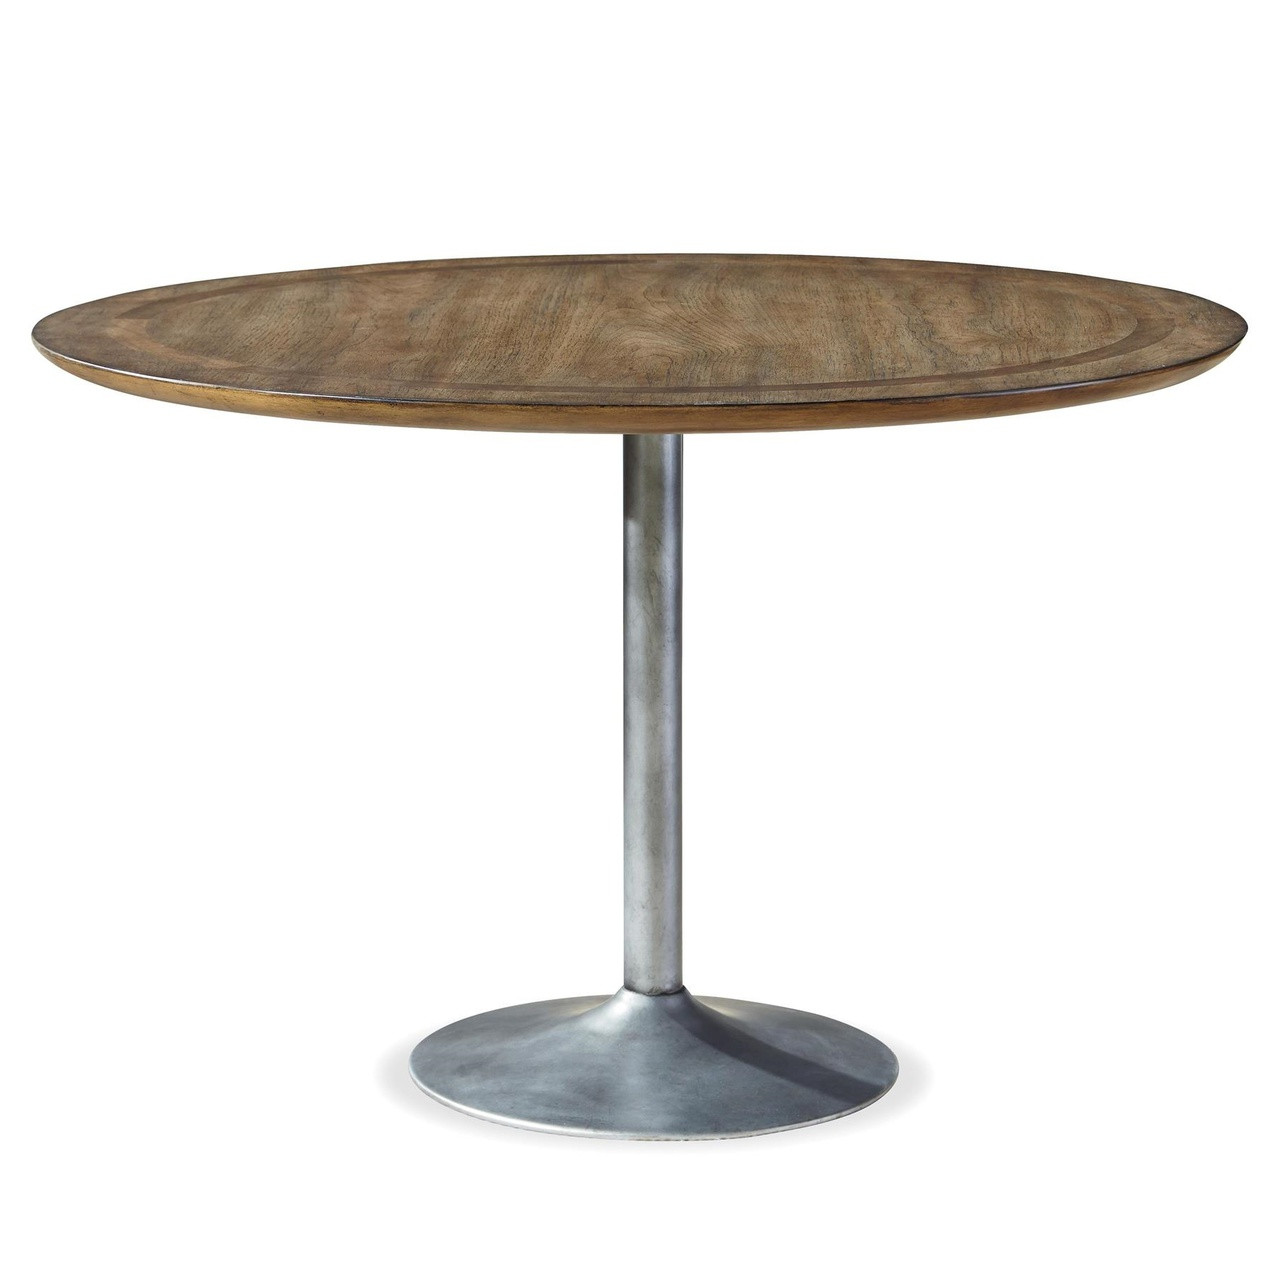 Maison Industrial Metal Pedestal Round Dining Table 48" | Zin Home